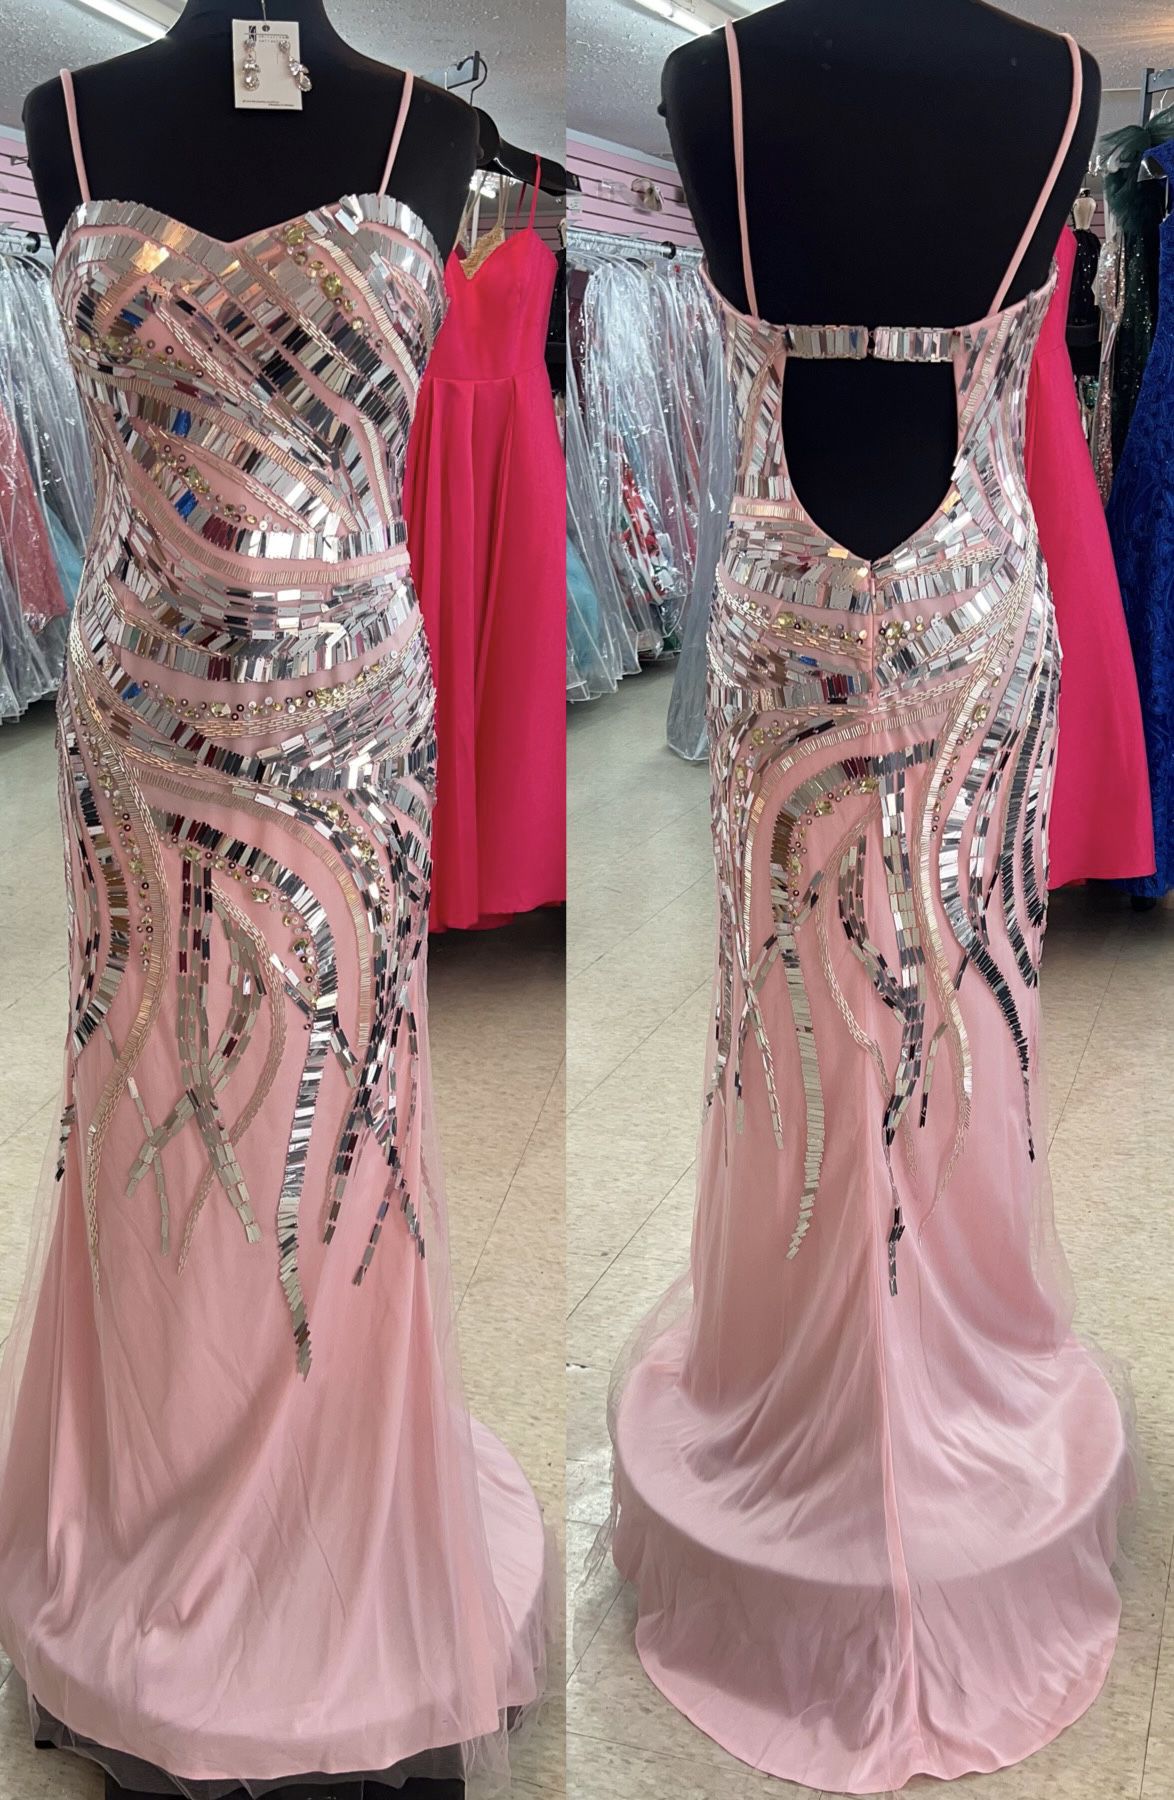 New With Tags Blush Prom Size 10 Formal Dress & Prom Dress $99